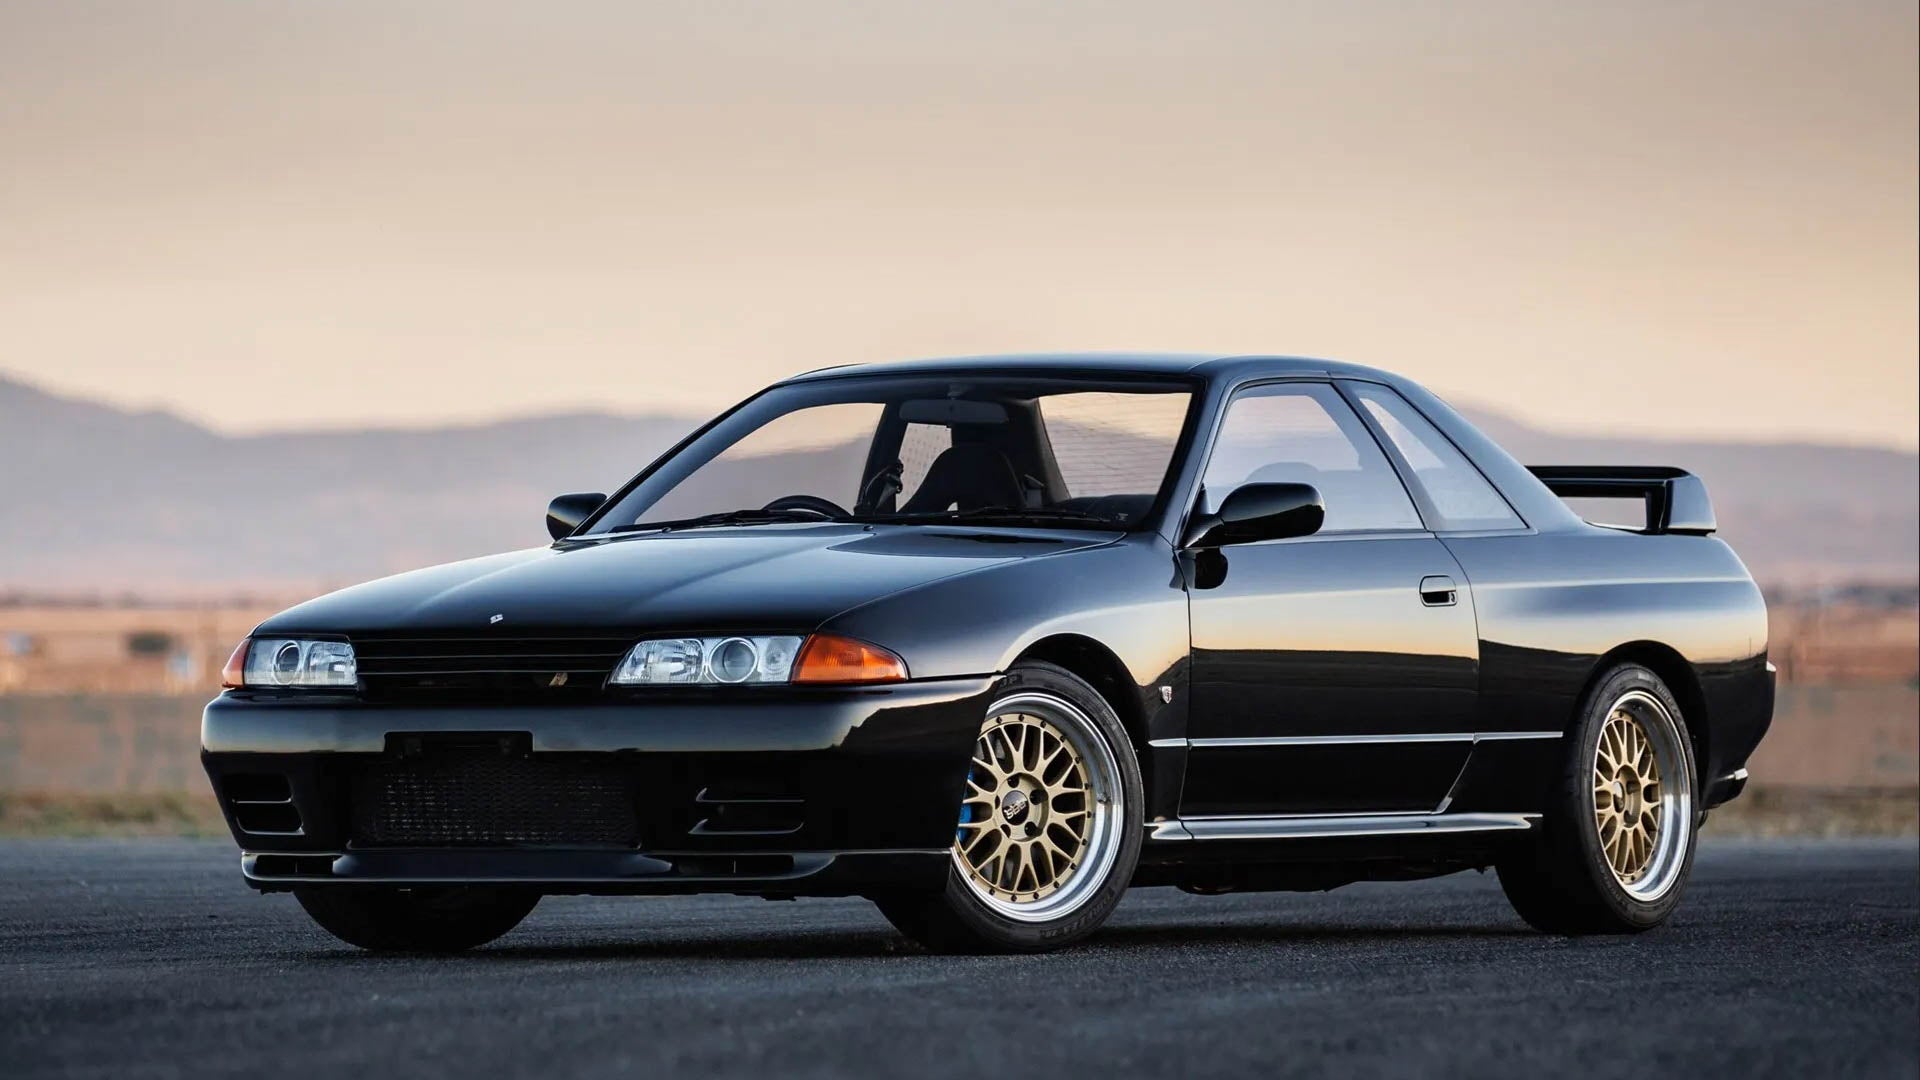 Three Gorgeous Classic Nissan Skylines Will Hit the Auction Block